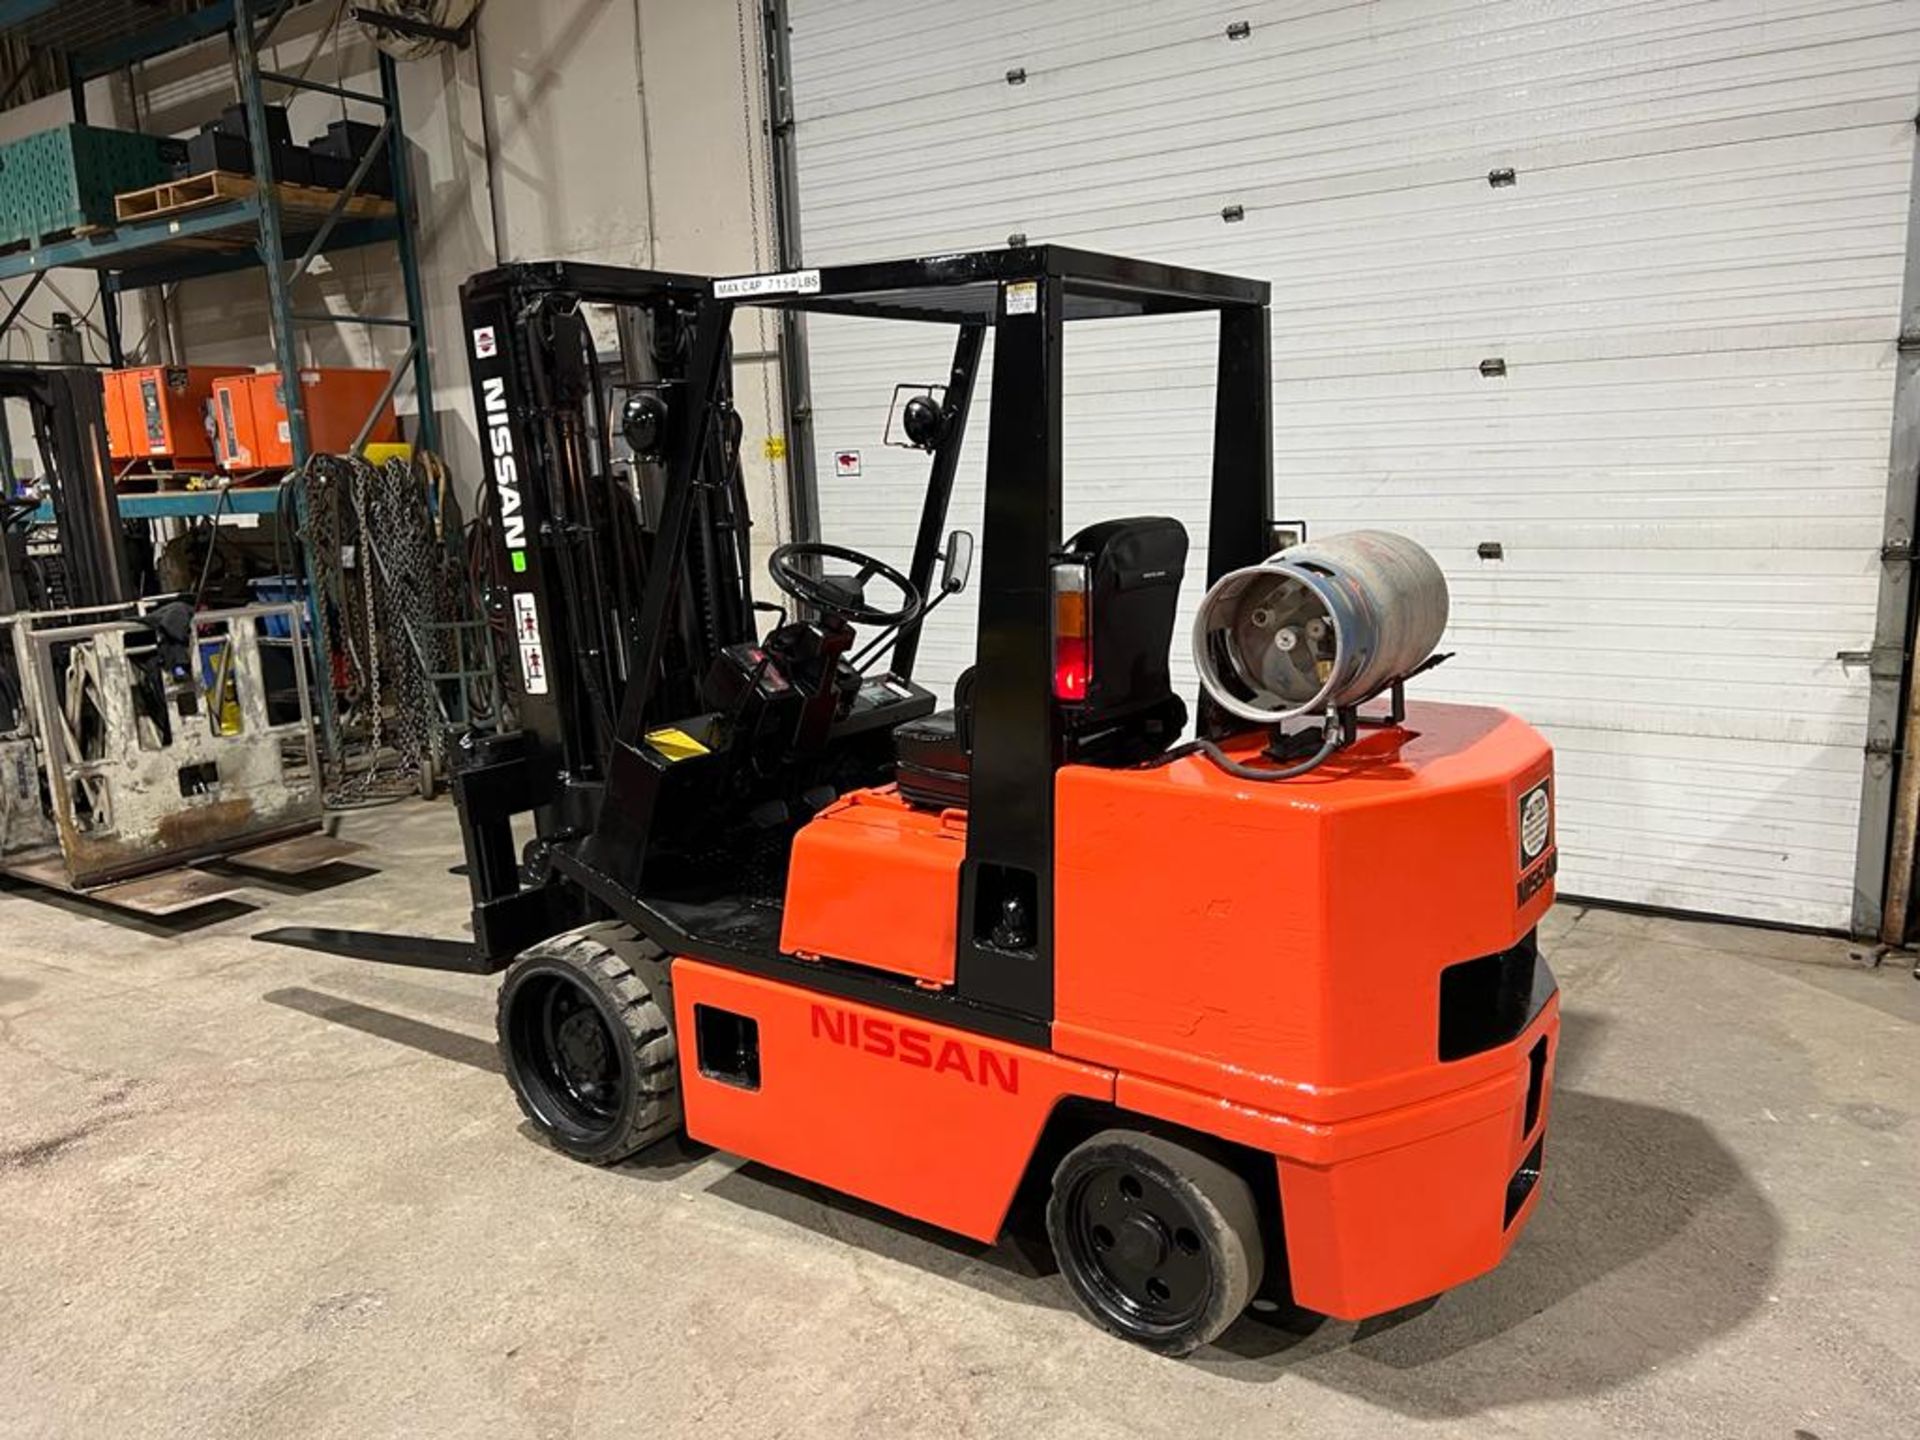 NICE Nissan 7,150lbs Capacity Forklift LPG (propane) with Sideshift 3-stage mast and LOW HOURS - Image 2 of 5